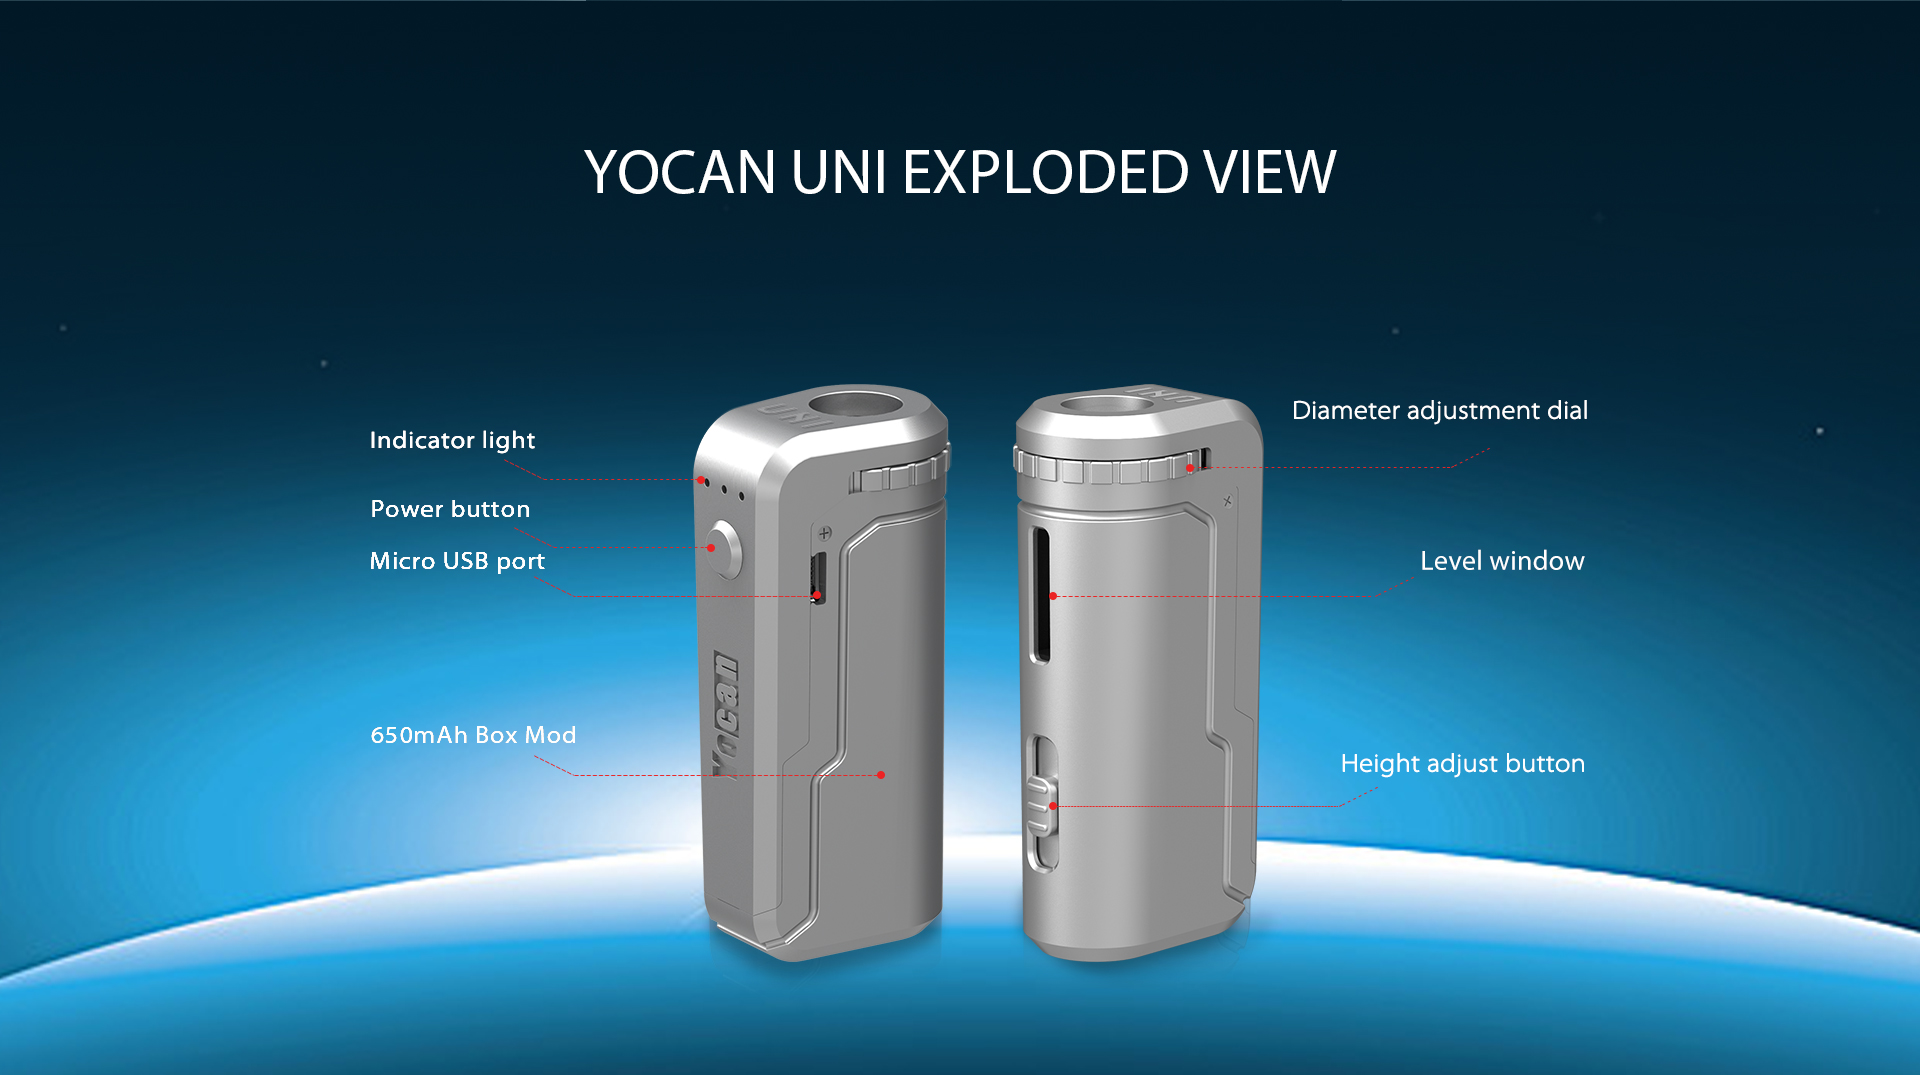 Yocan UNI exploded view